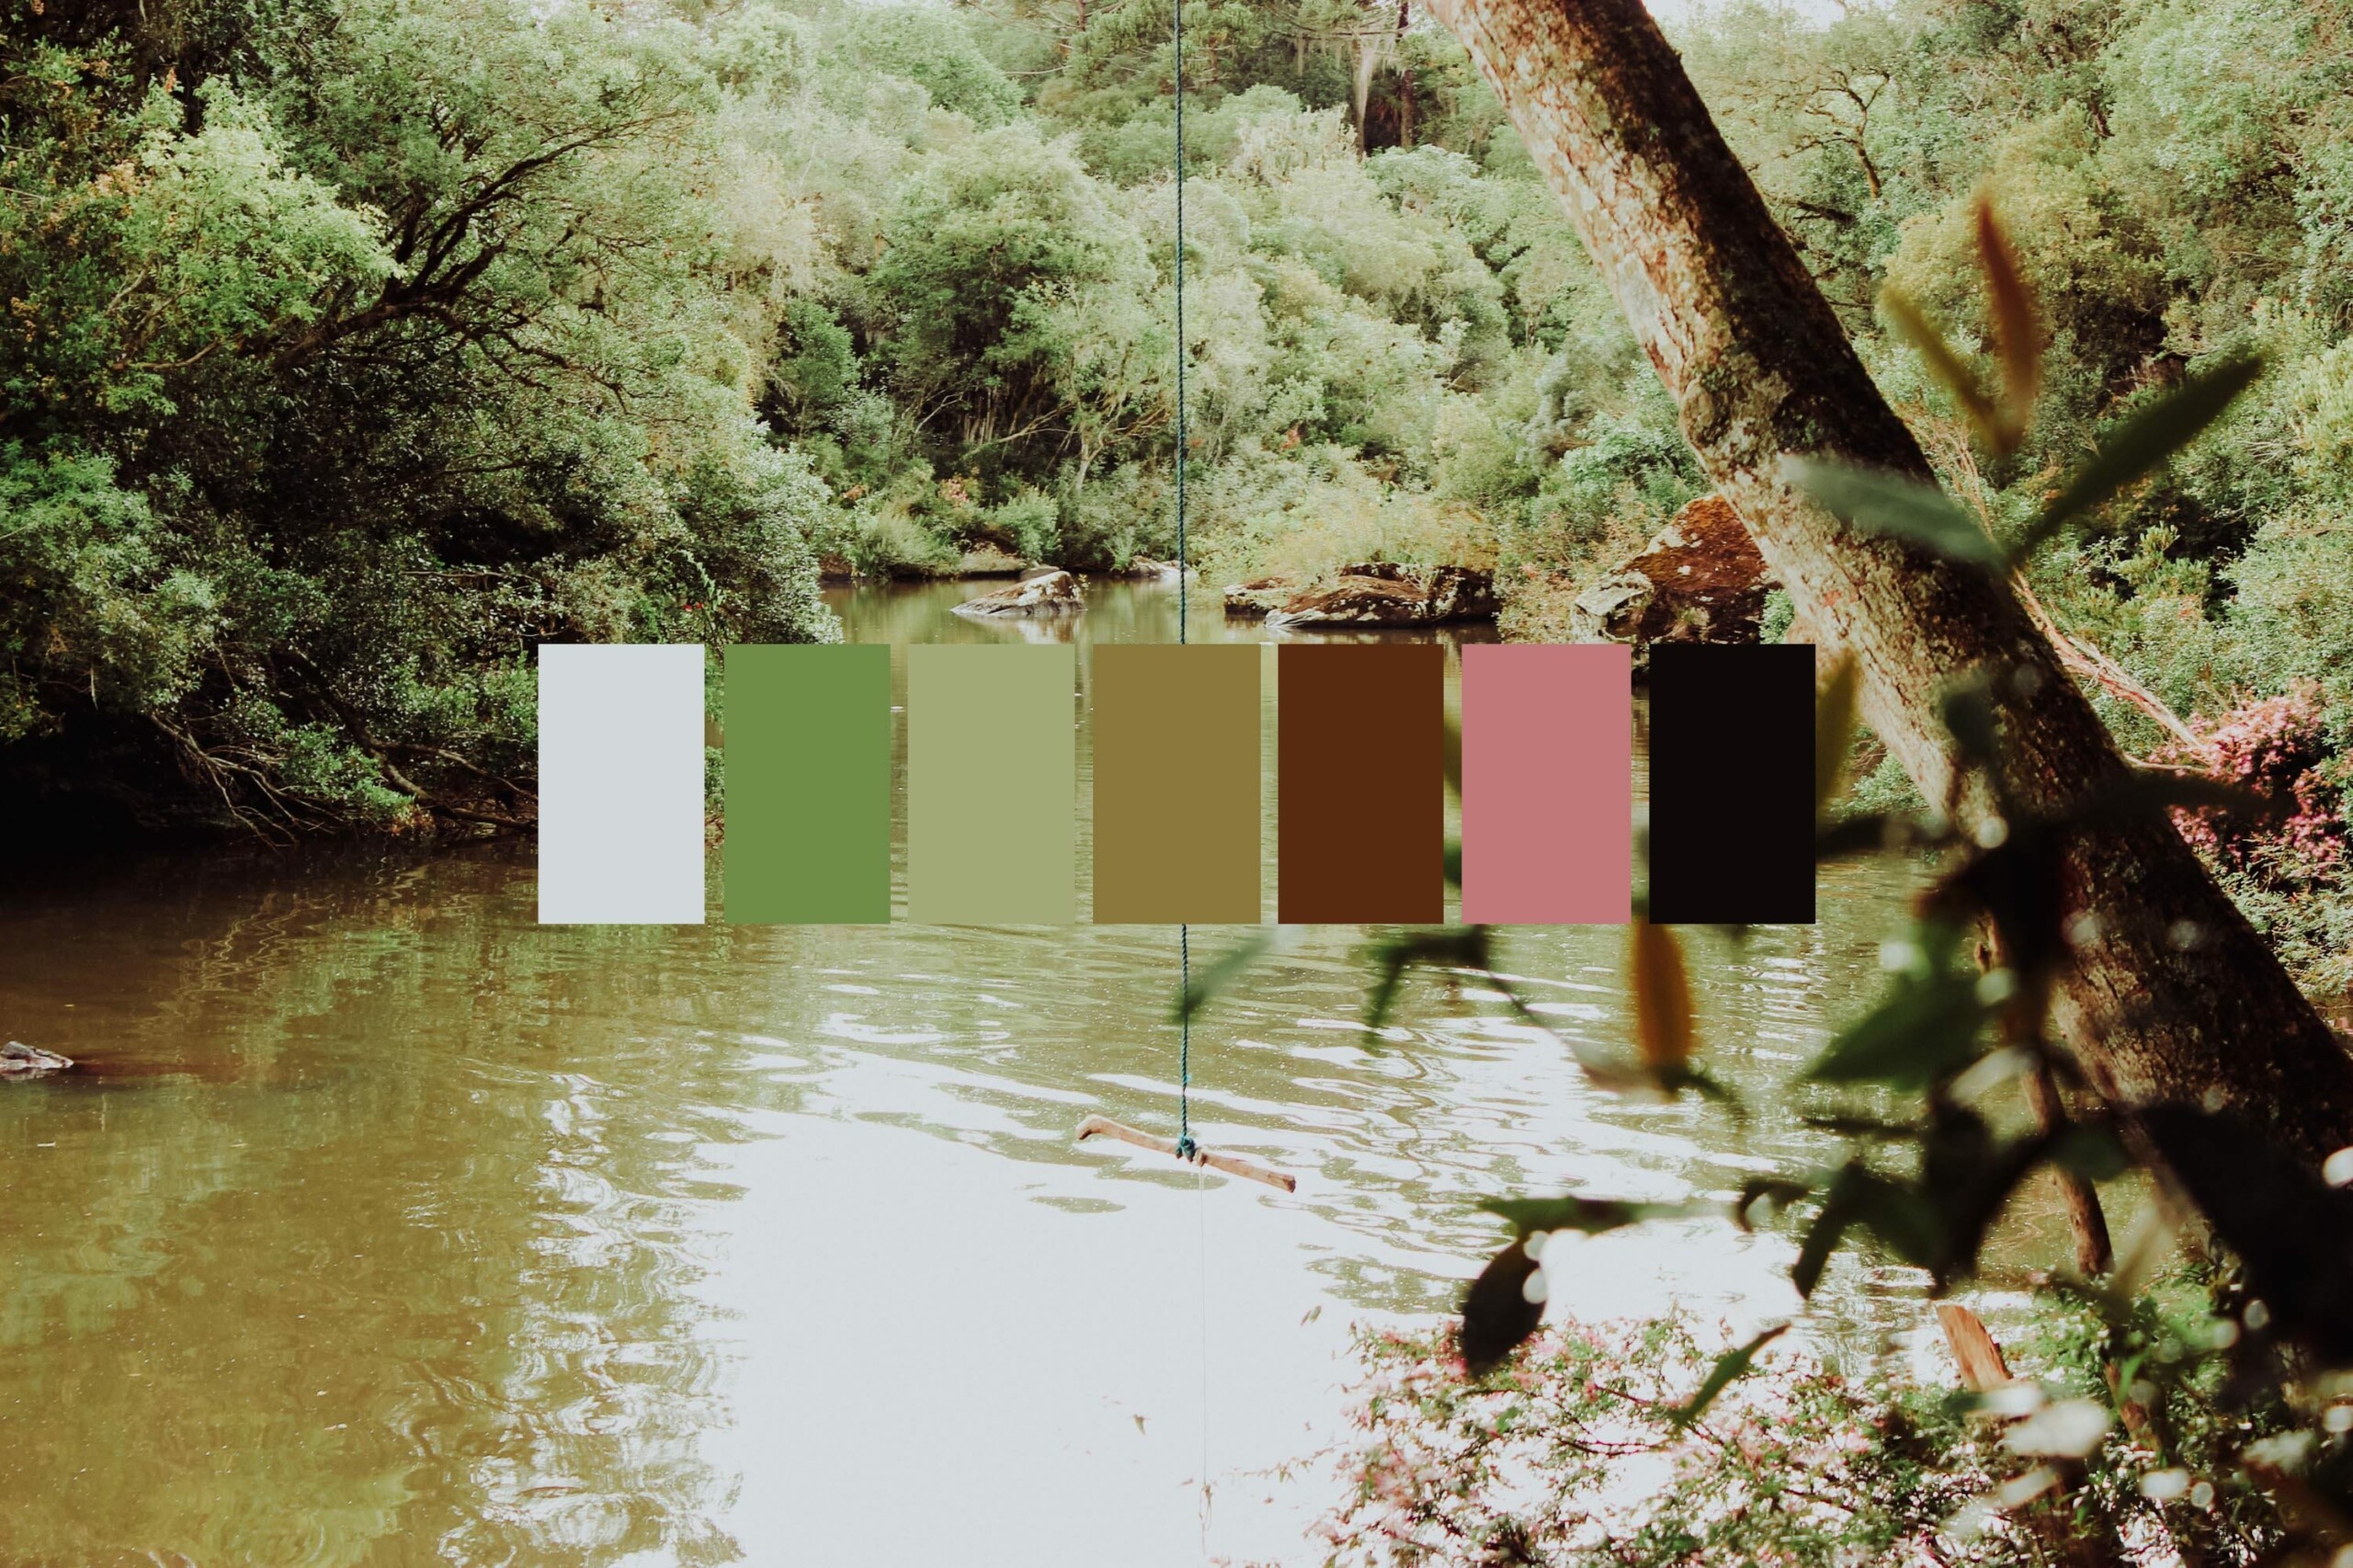 Image of a river surrounded by trees. On top of the image is a palatte of colors that use colors from the image.